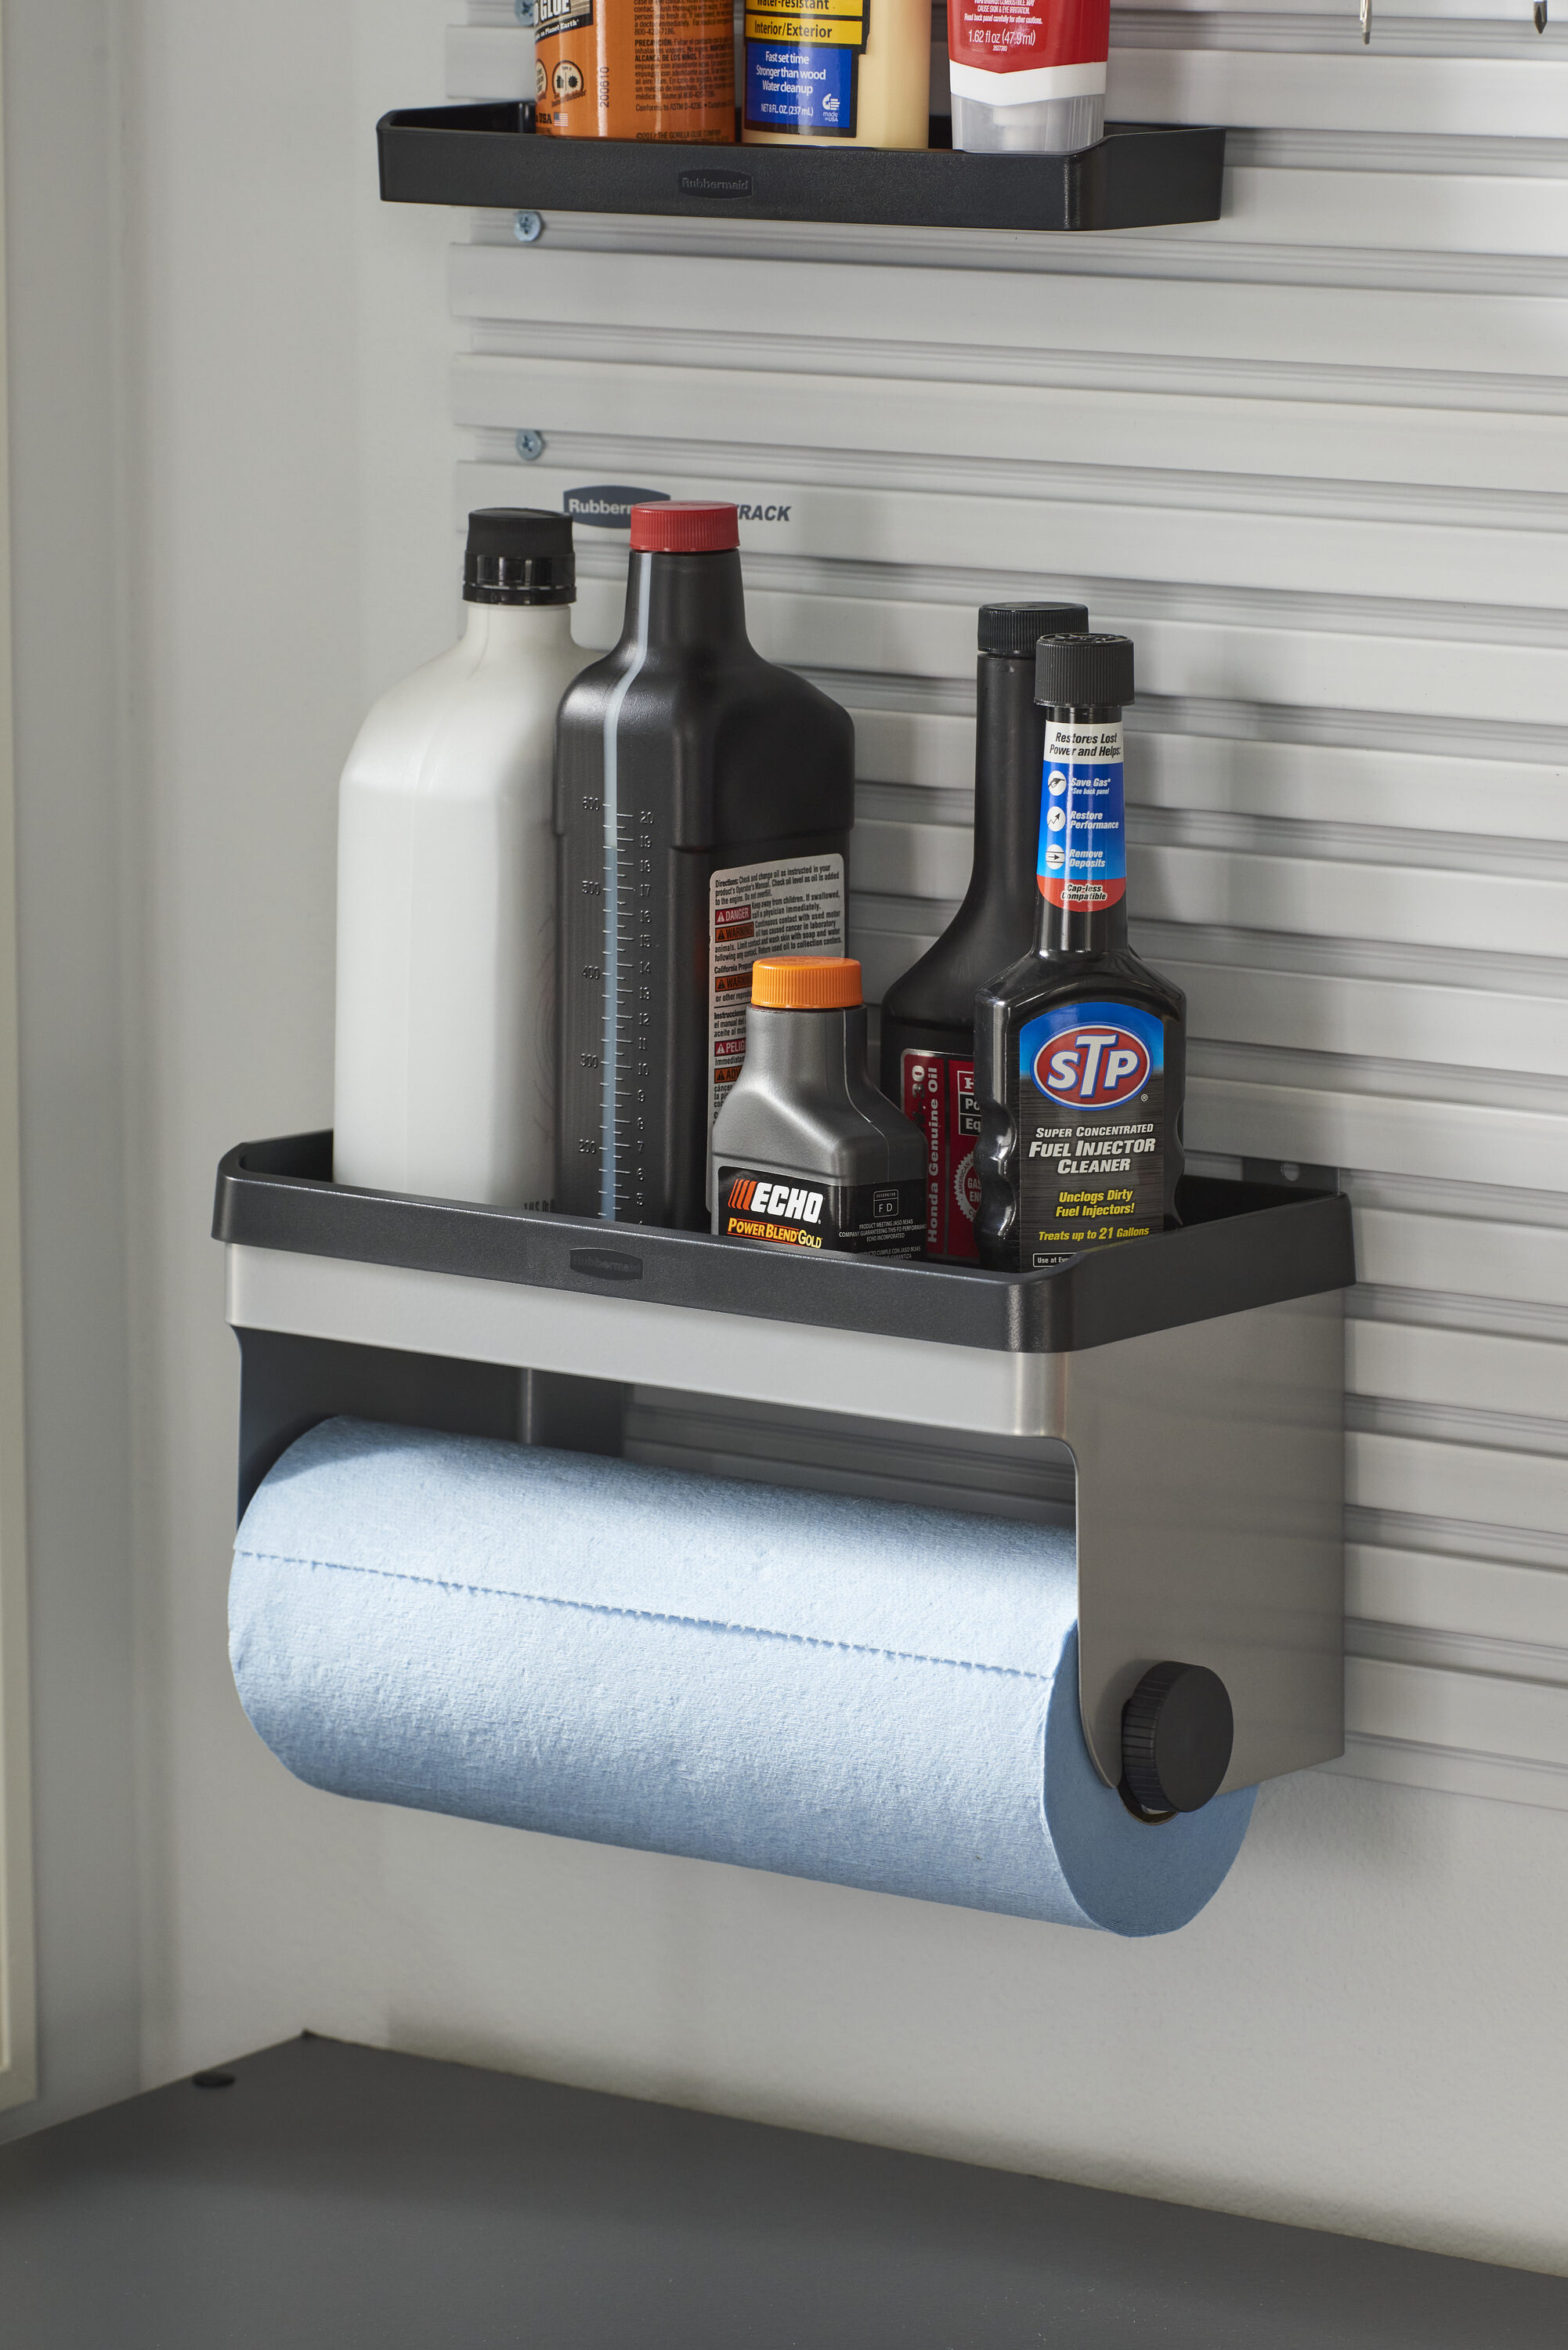 StoreYourBoard Paper Towel Holder, Wall Mount Shelf, Holds 50 lbs, Garage, Home, Quick Clean Station